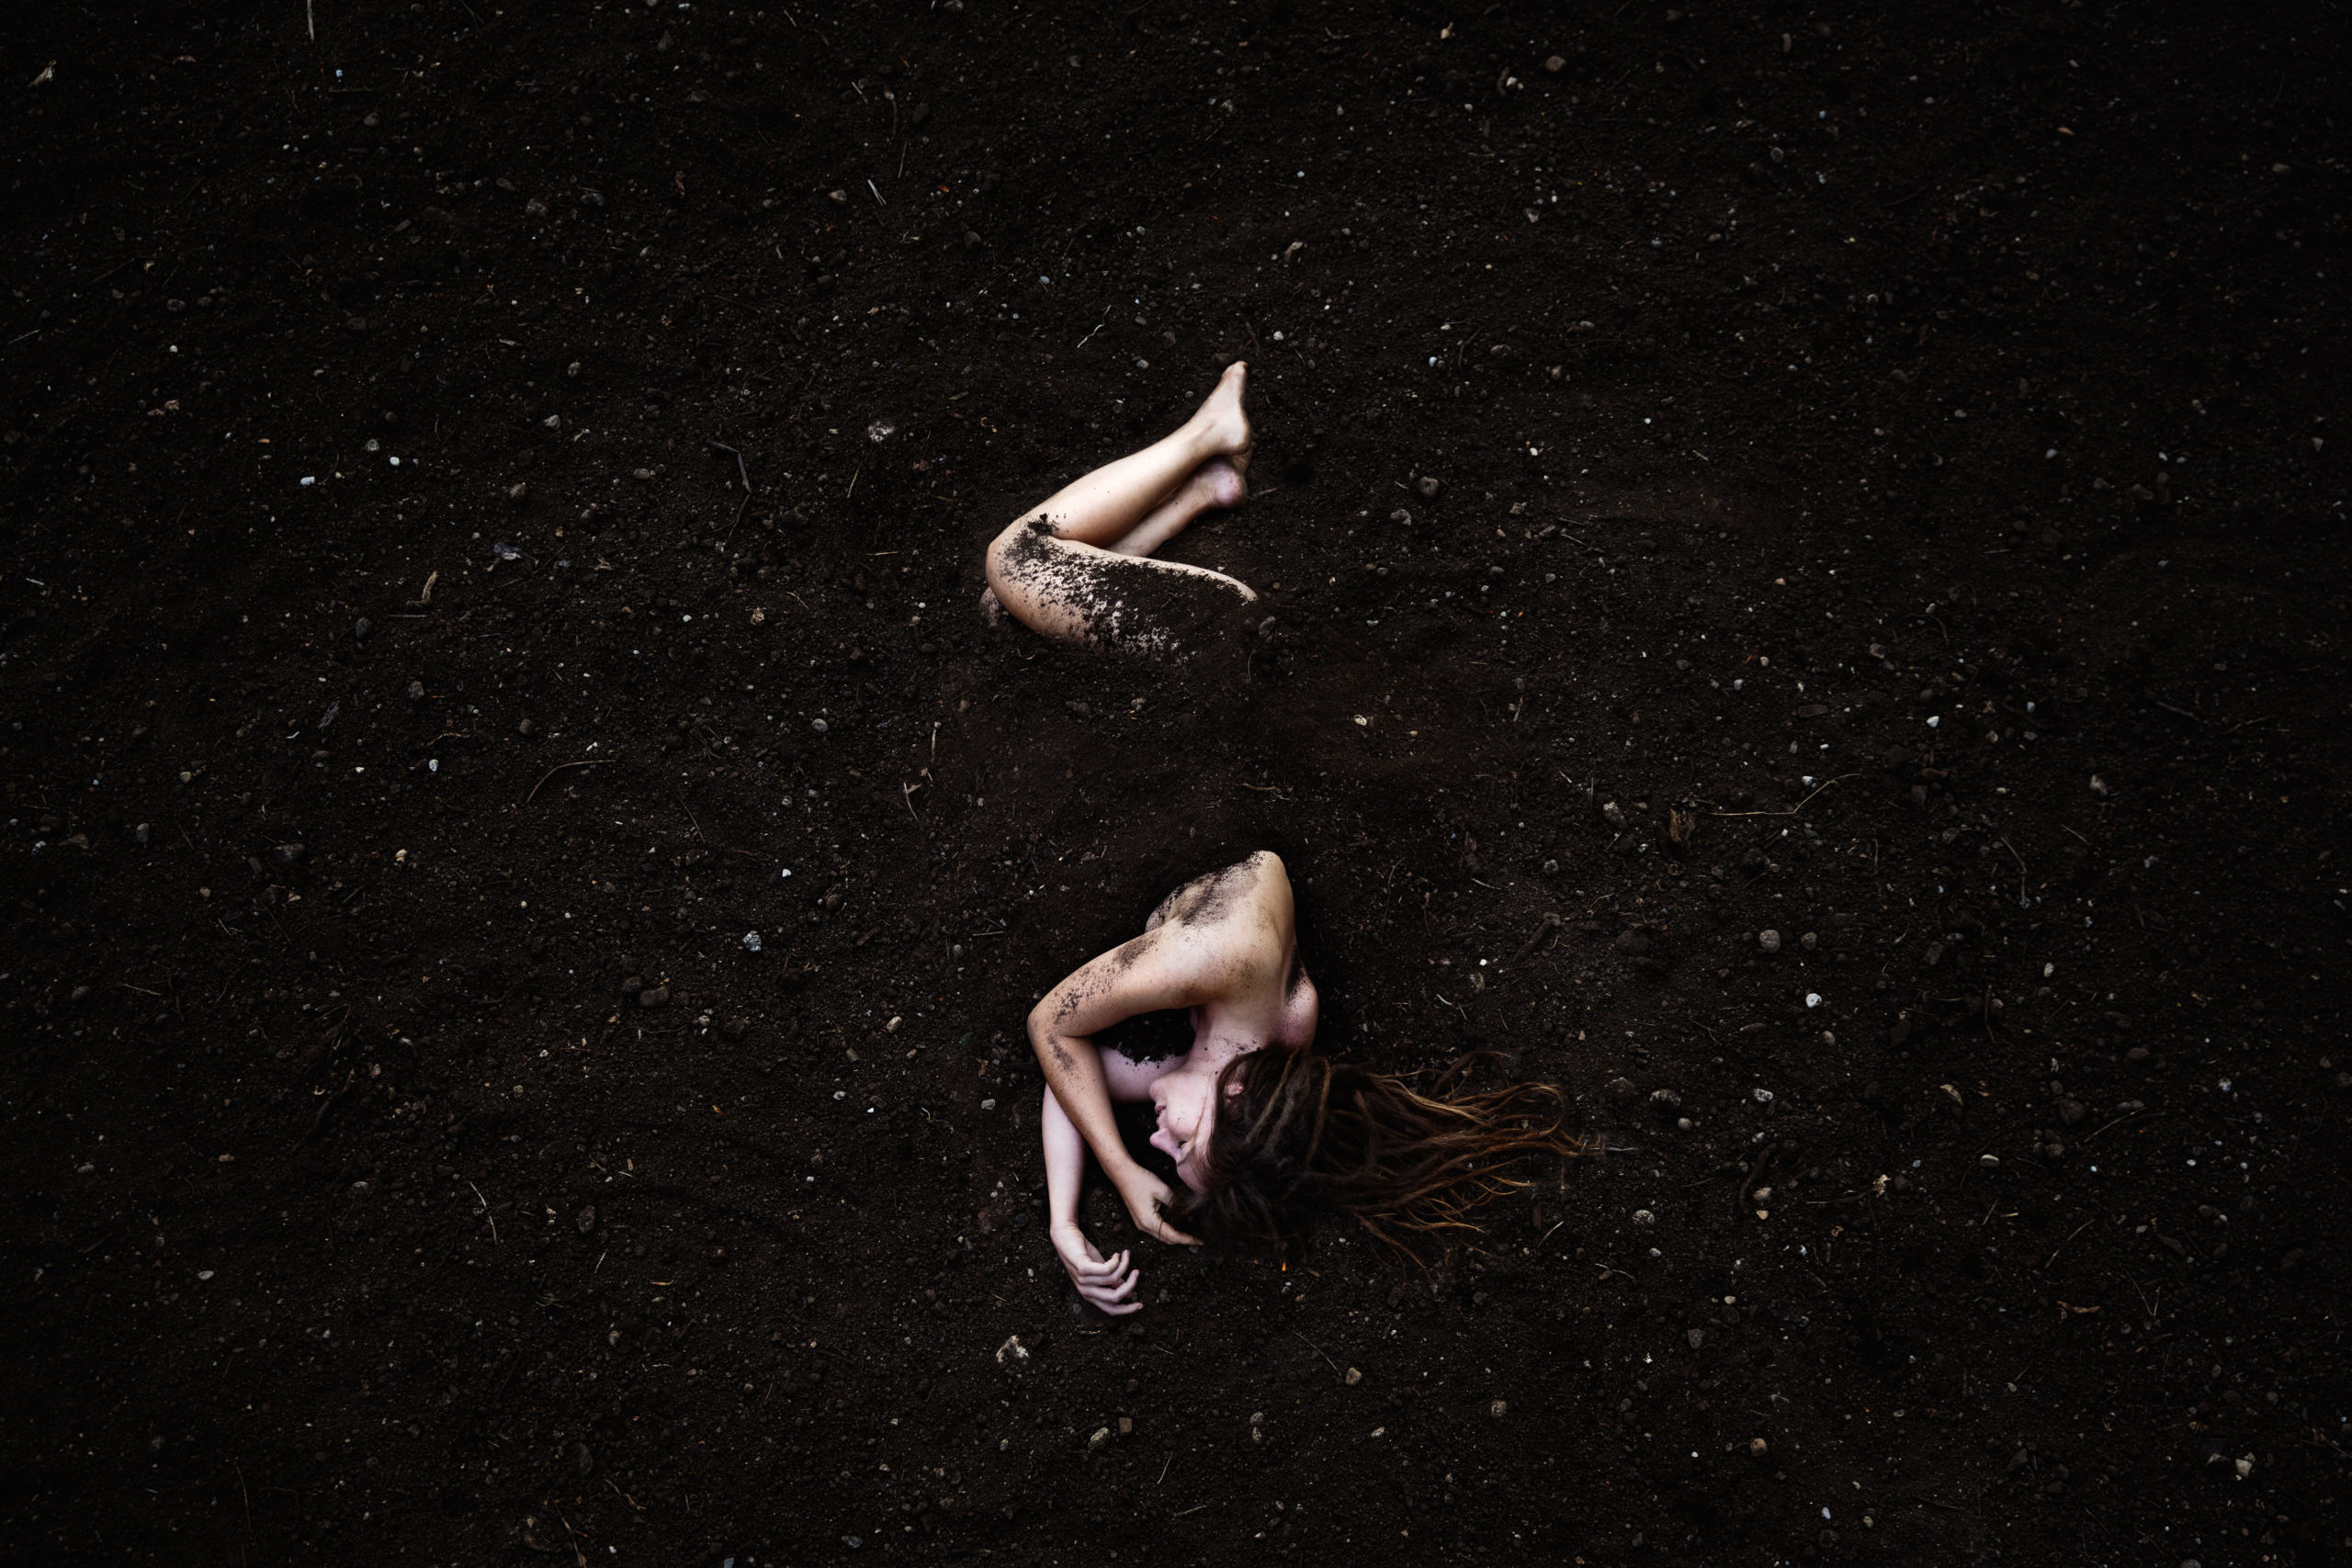 Mother earth self portrait photography, depicting a woman almost completely covered by soil, only her bare upper body and legs are visible among the dark surroundings.